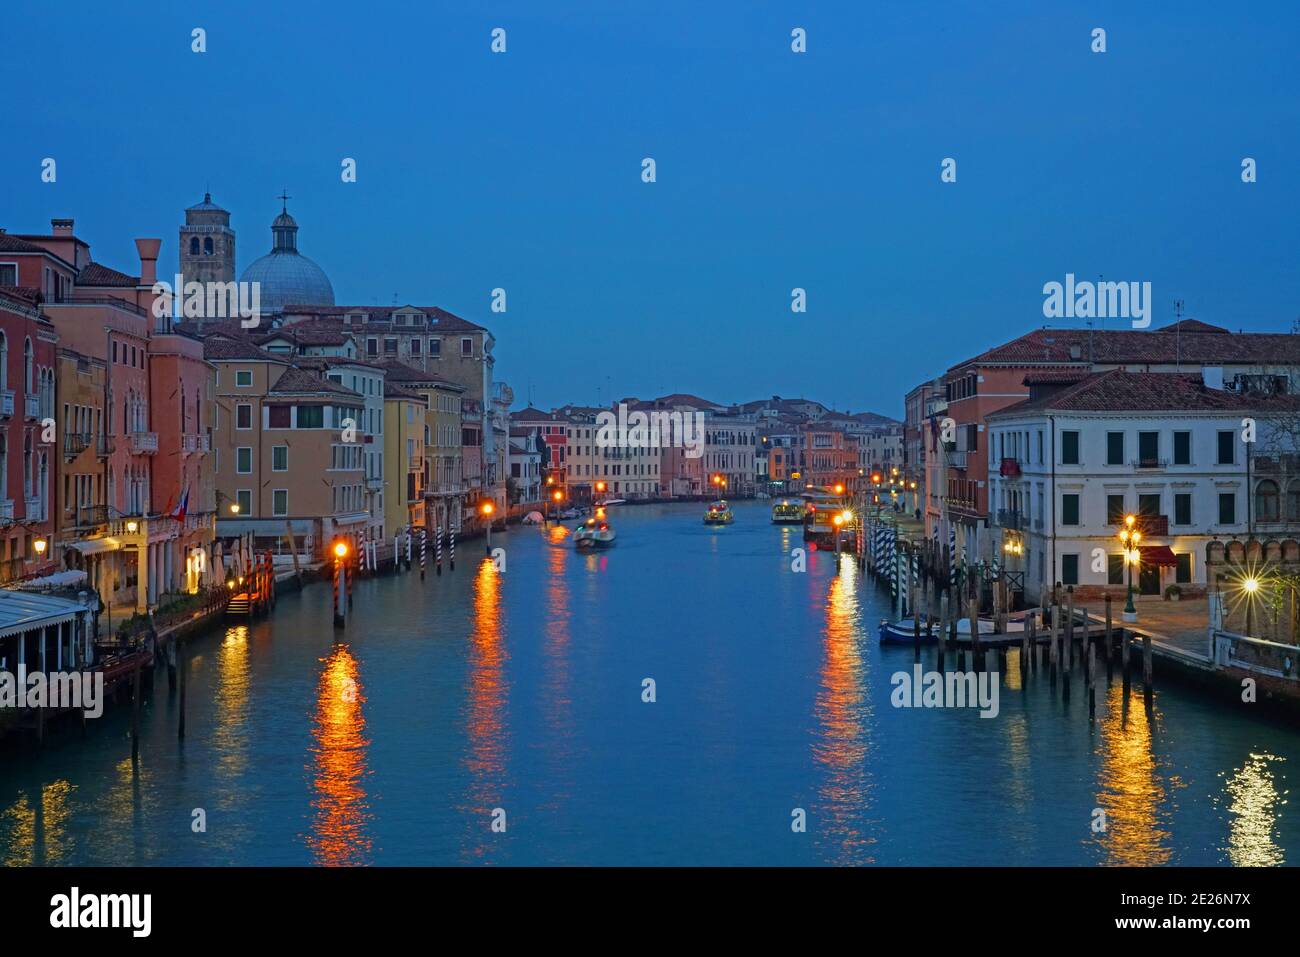 The Grand Canal in Venice at night. Stock Photo